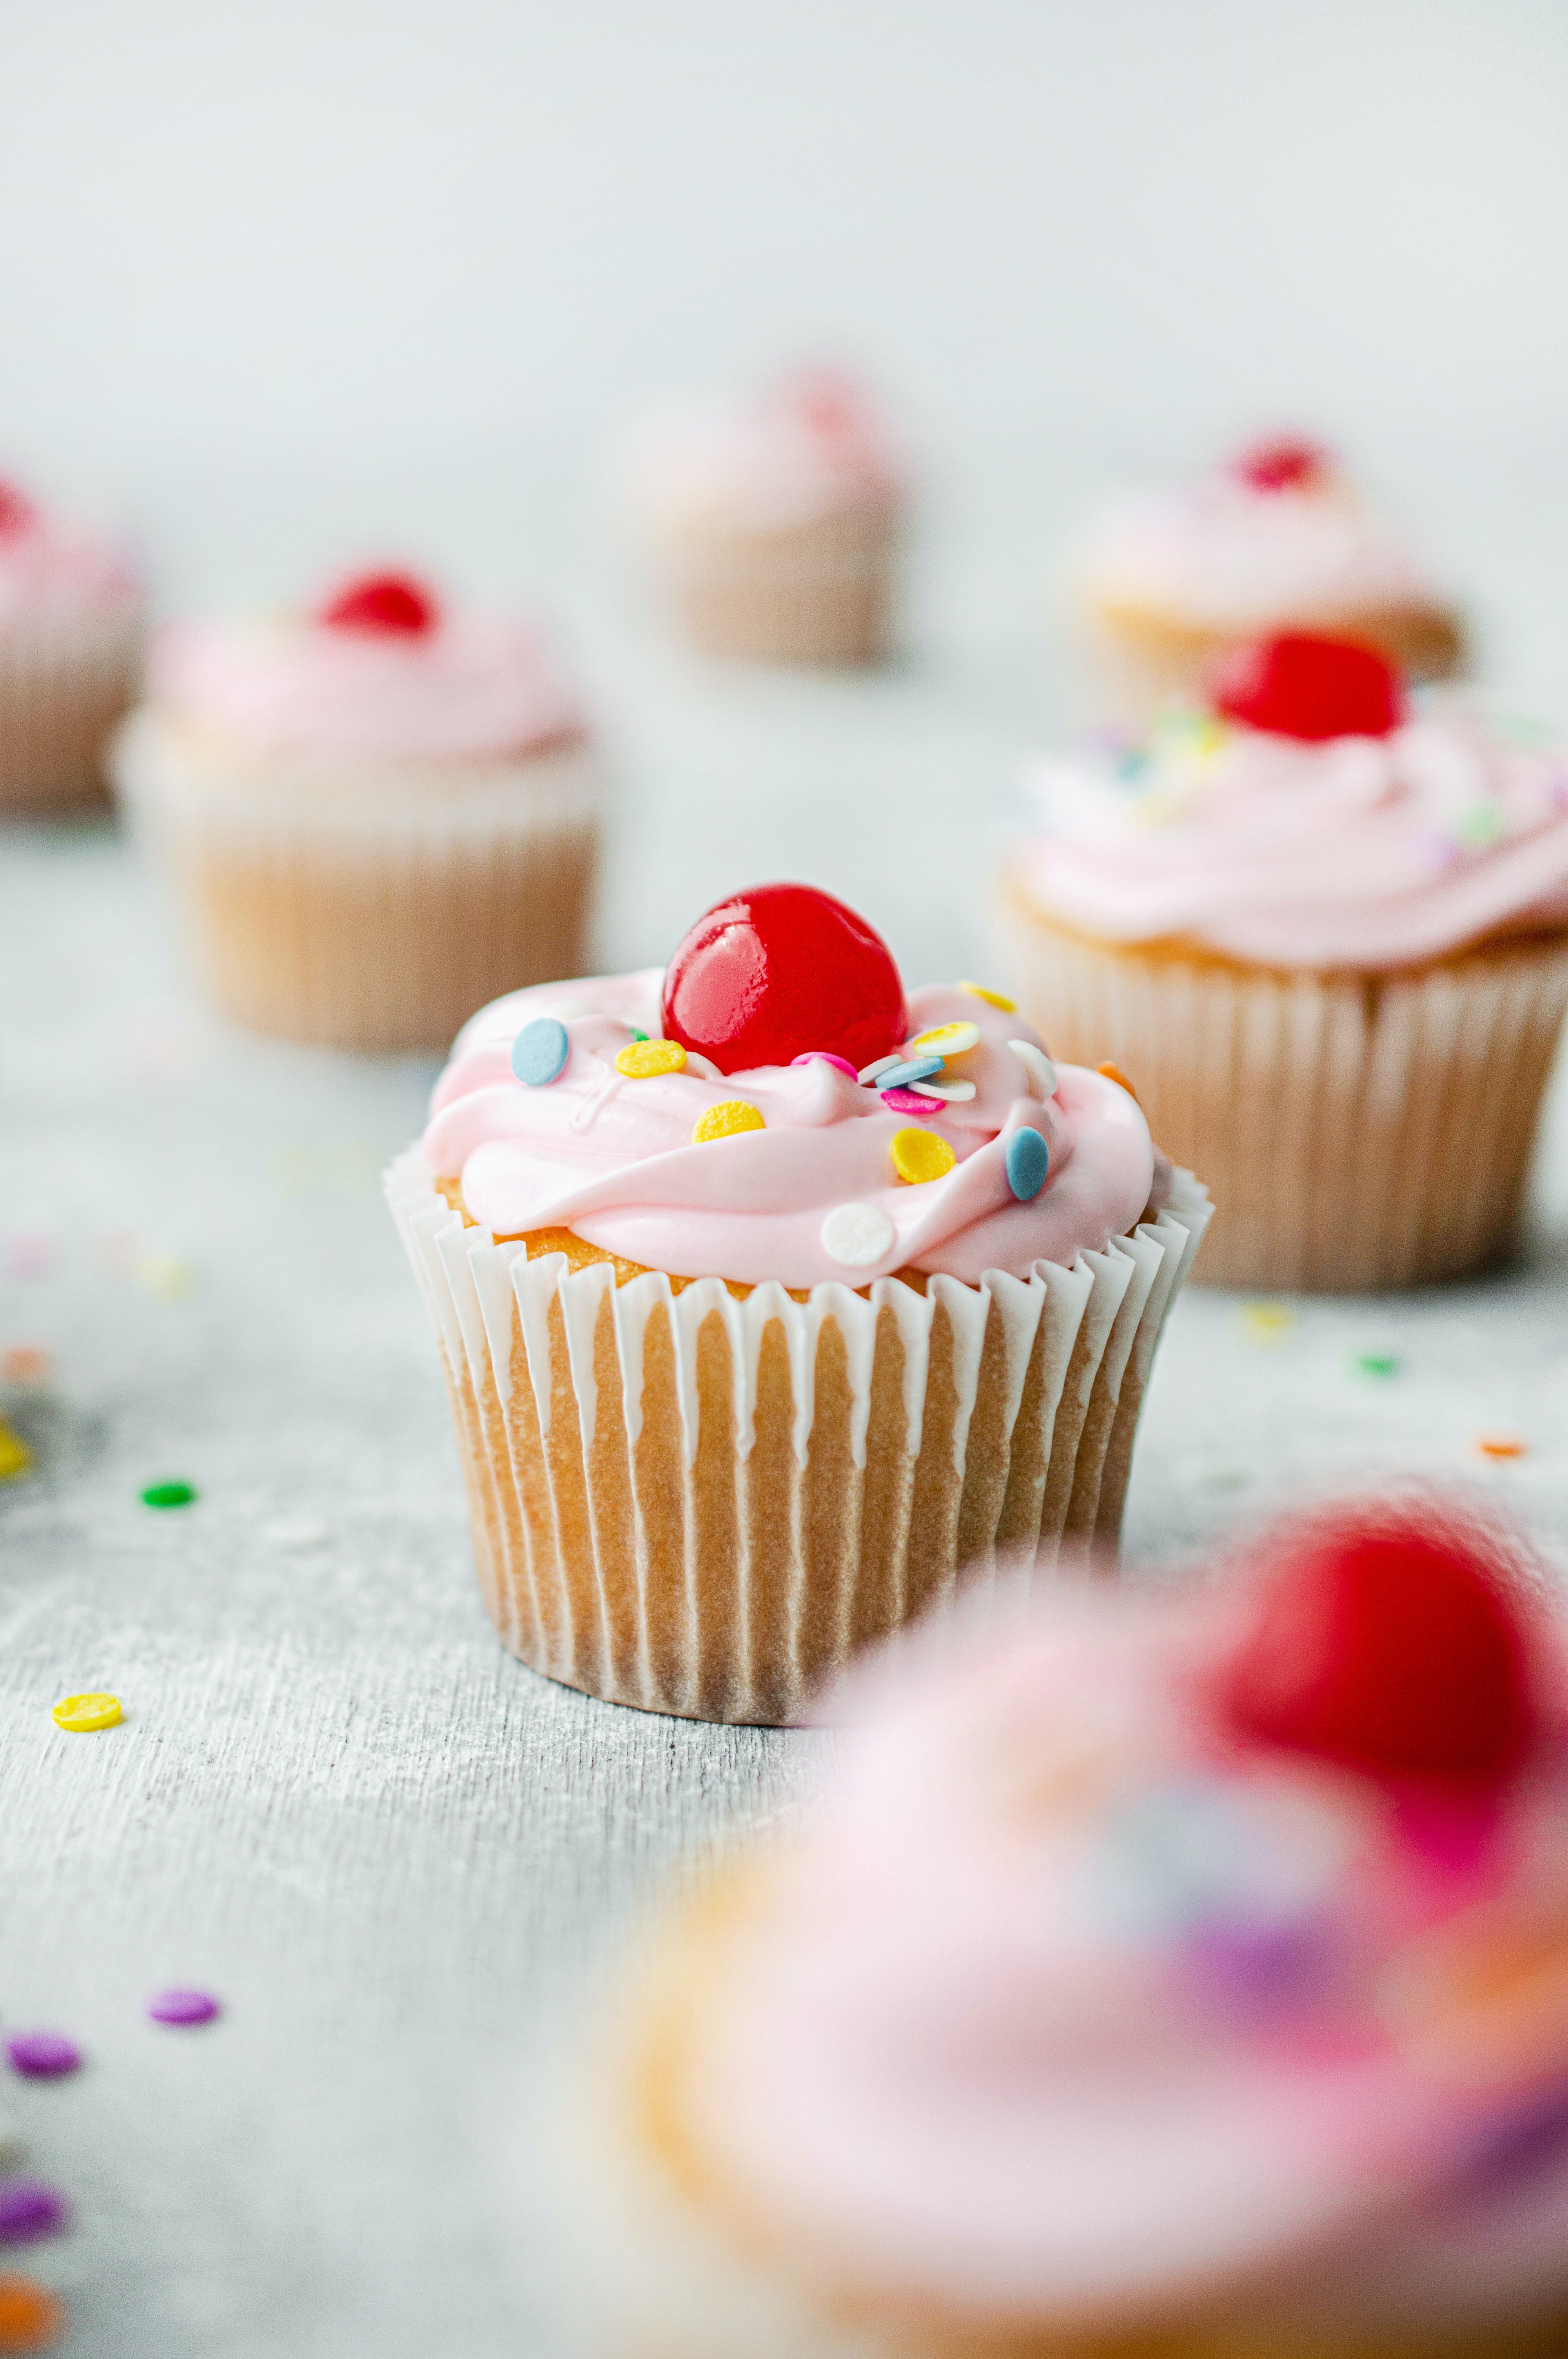 Free download wallpaper Food, Confetti, Desert, Cake, Bakery Products, Baking on your PC desktop